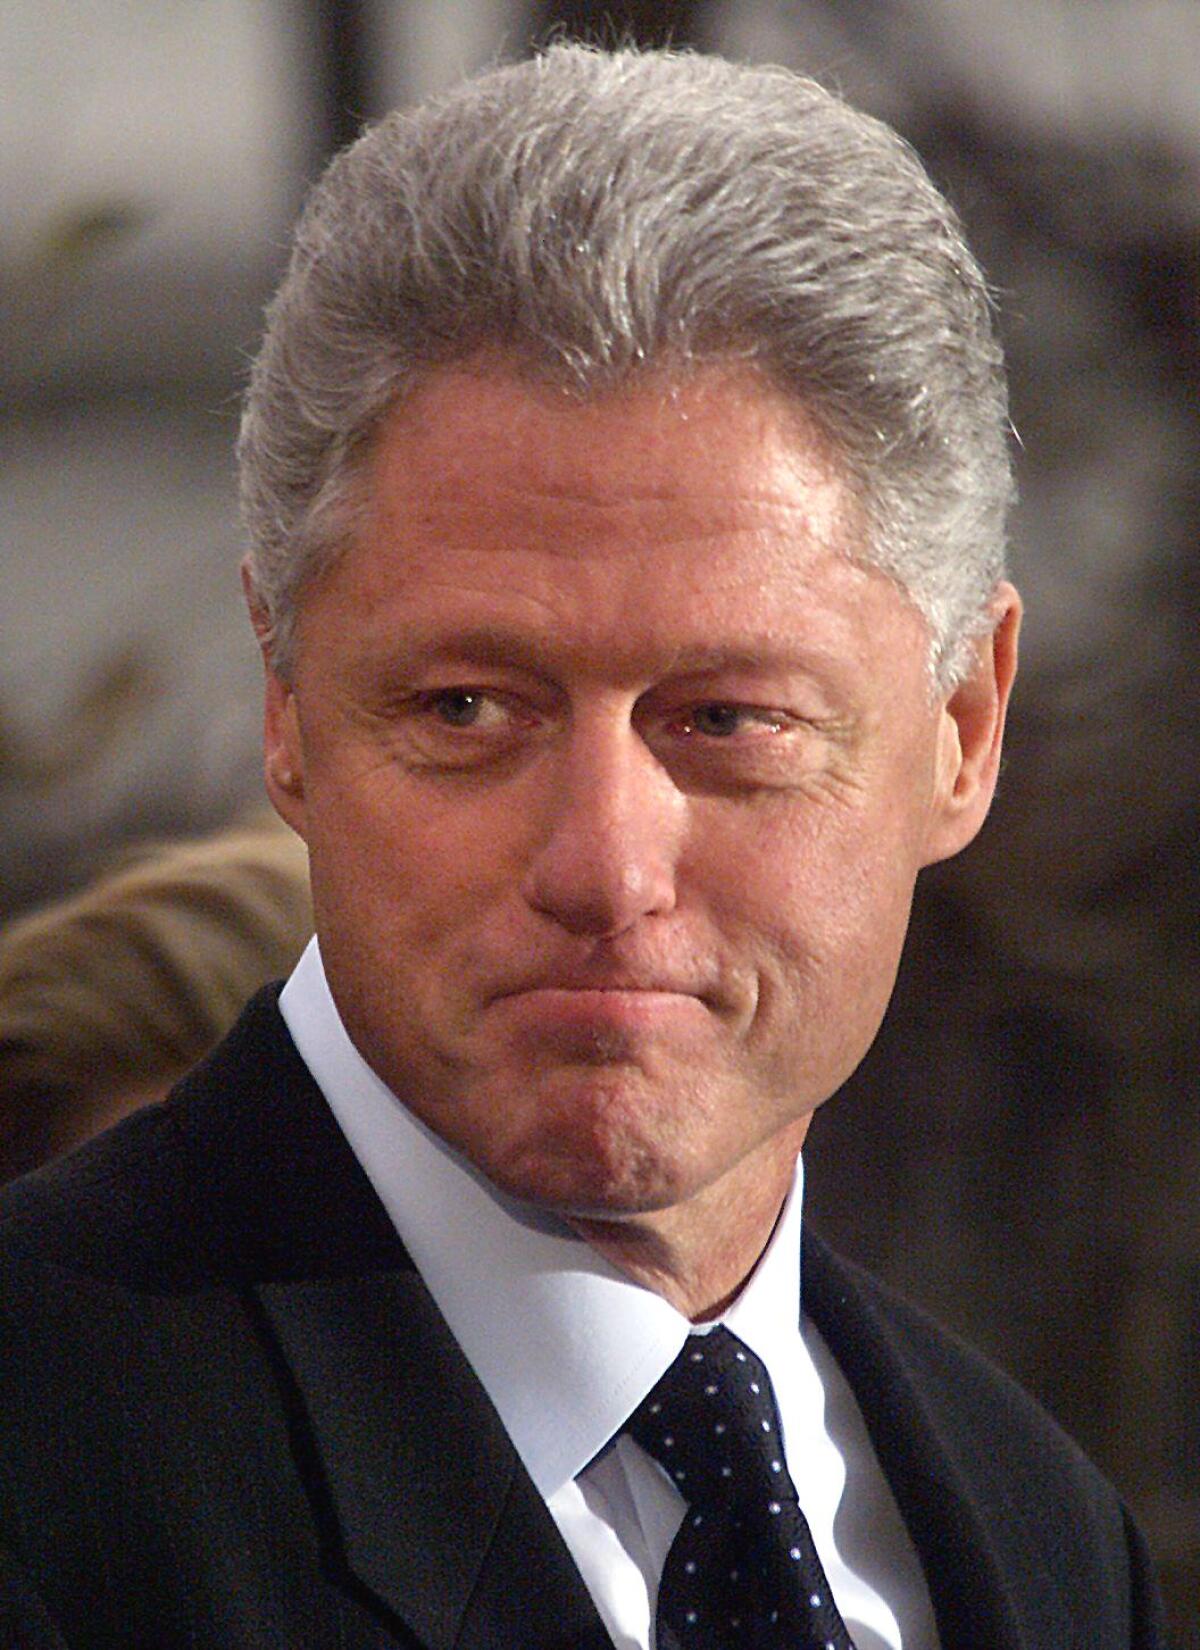 An image of President Bill Clinton in 1998